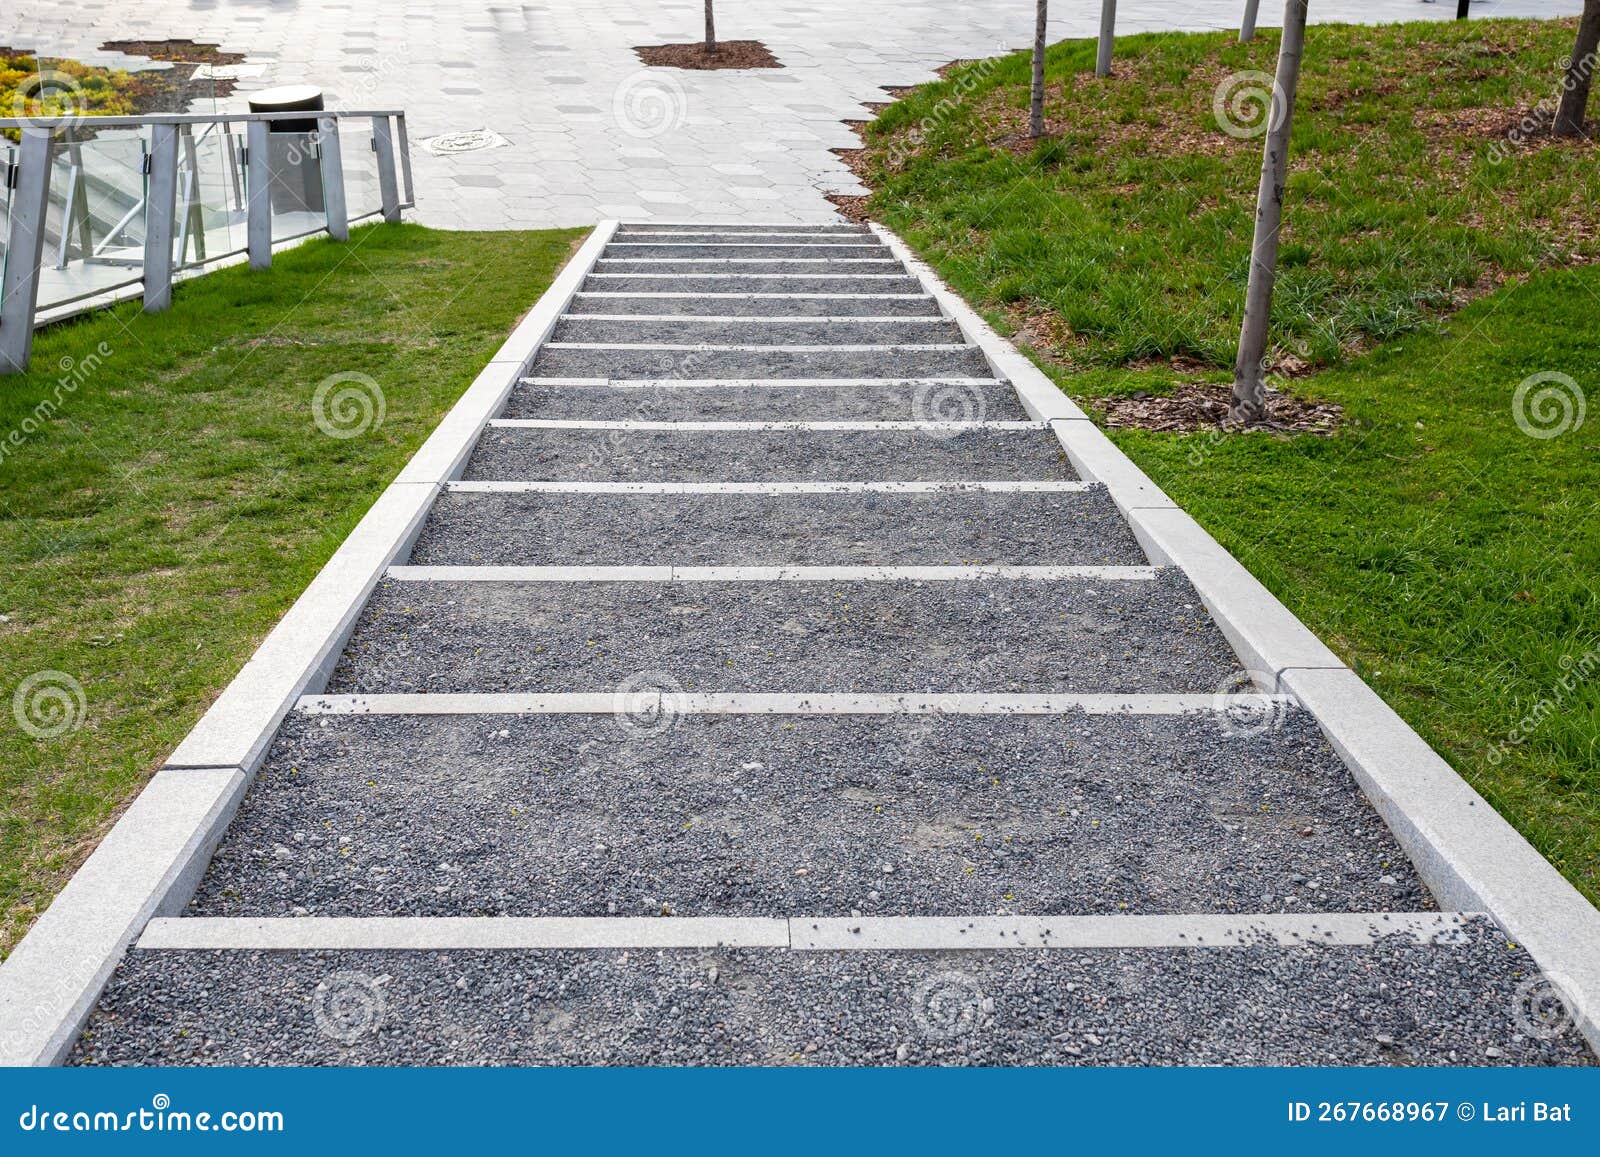 Improvement of the Urban Environment. a Staircase on a Footpath in a ...